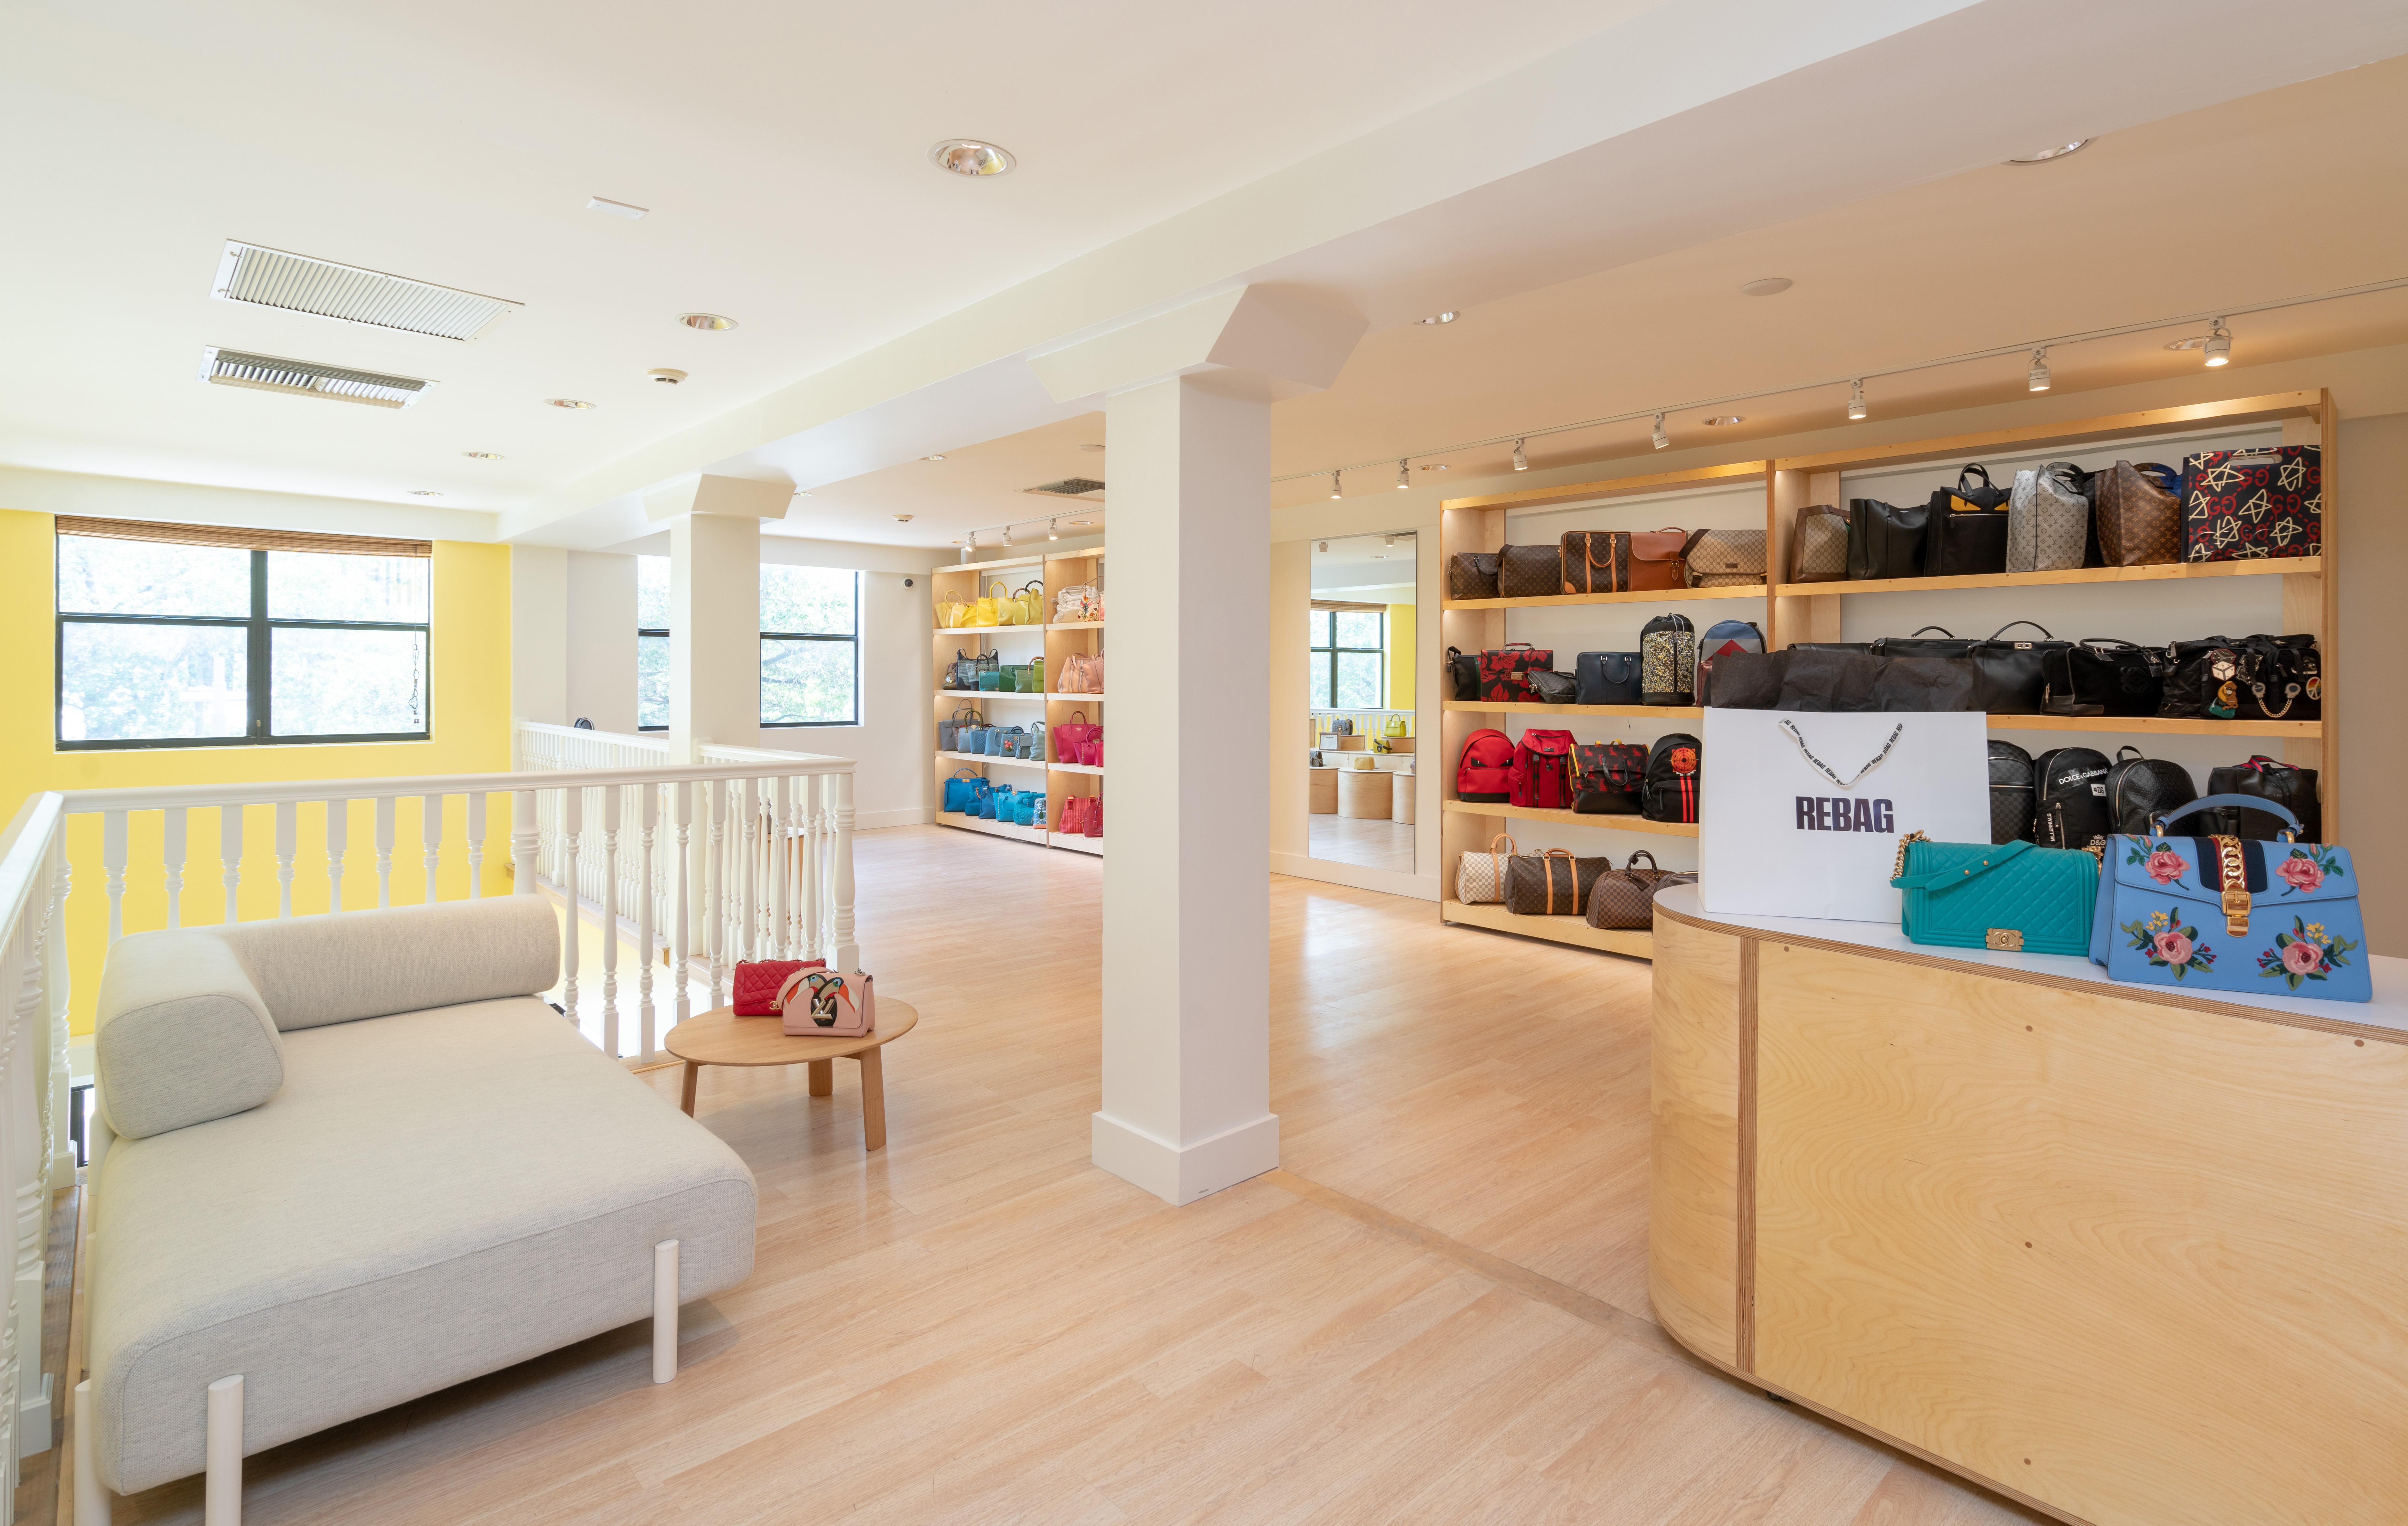 Rebag's First LA Luxury Resale Boutiques Feature Rainbow Walls of